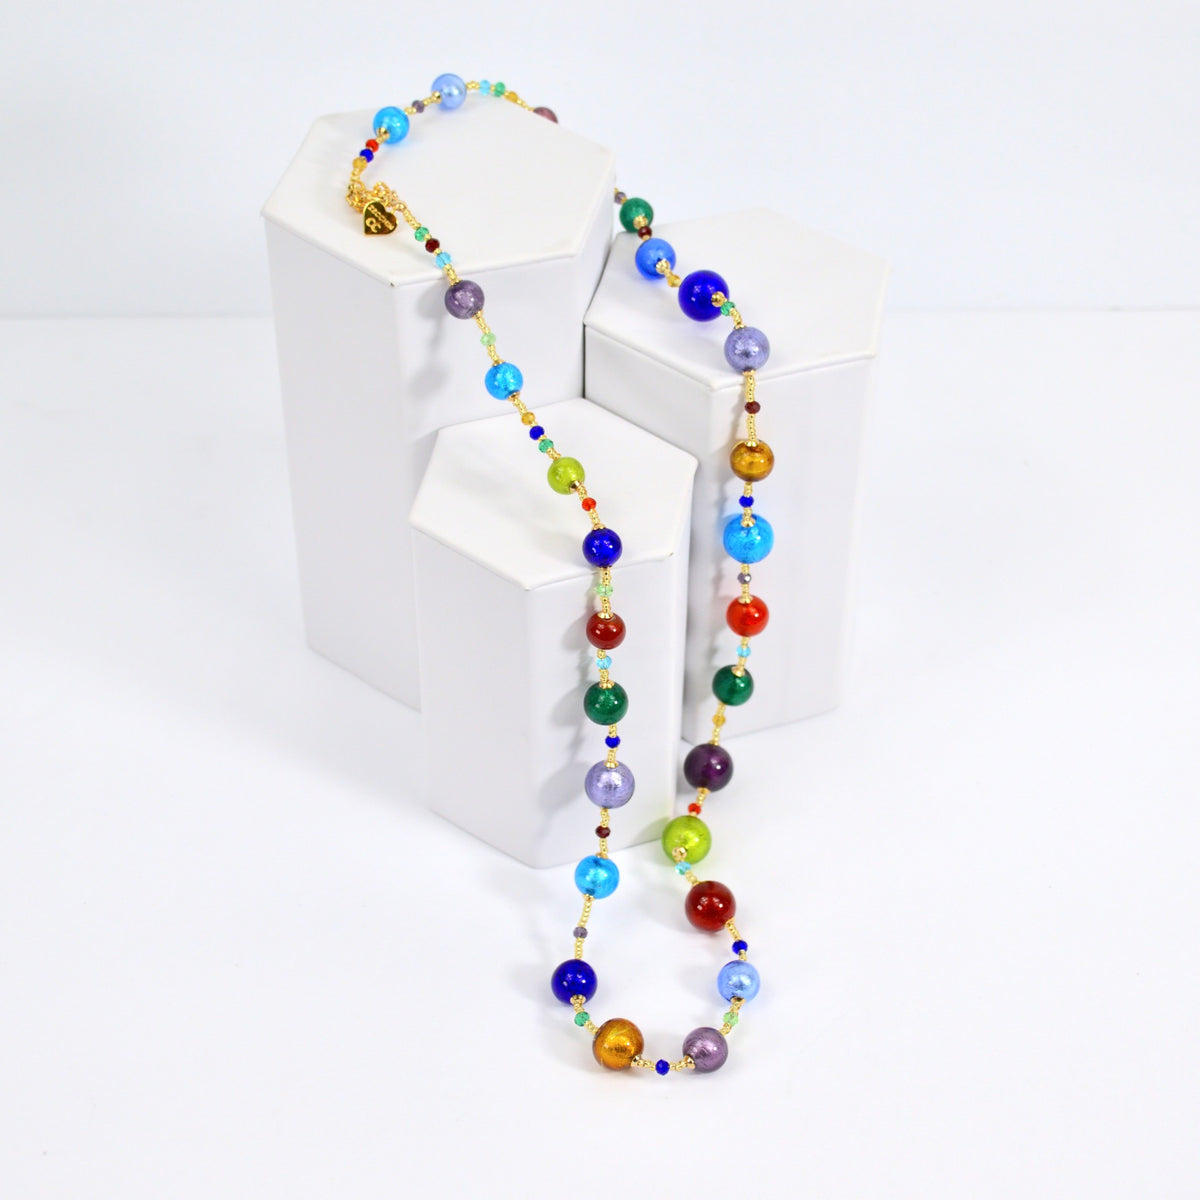 Roma Murano Glass Beaded Necklace, Multi-color glass beads, Made in Italy - My Italian Decor